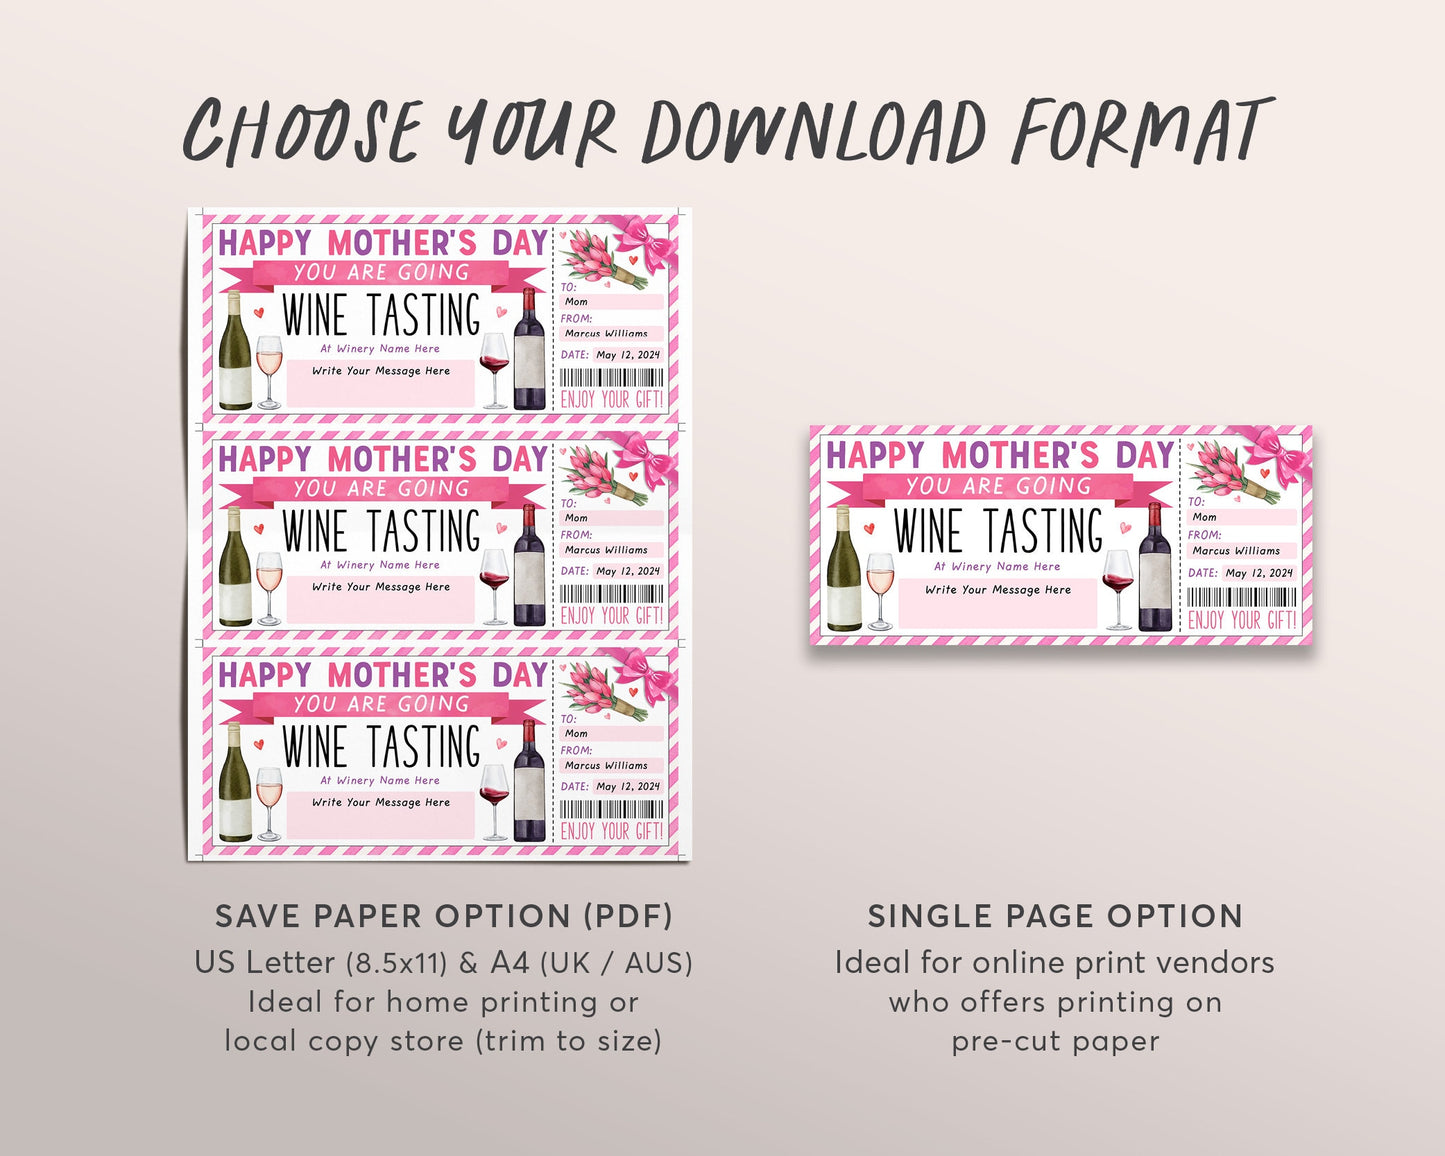 Mothers Day Wine Tasting Gift Voucher Editable Template, Surprise Wine Tasting Ticket Gift Certificate For Mom, Winery Vineyard Coupon